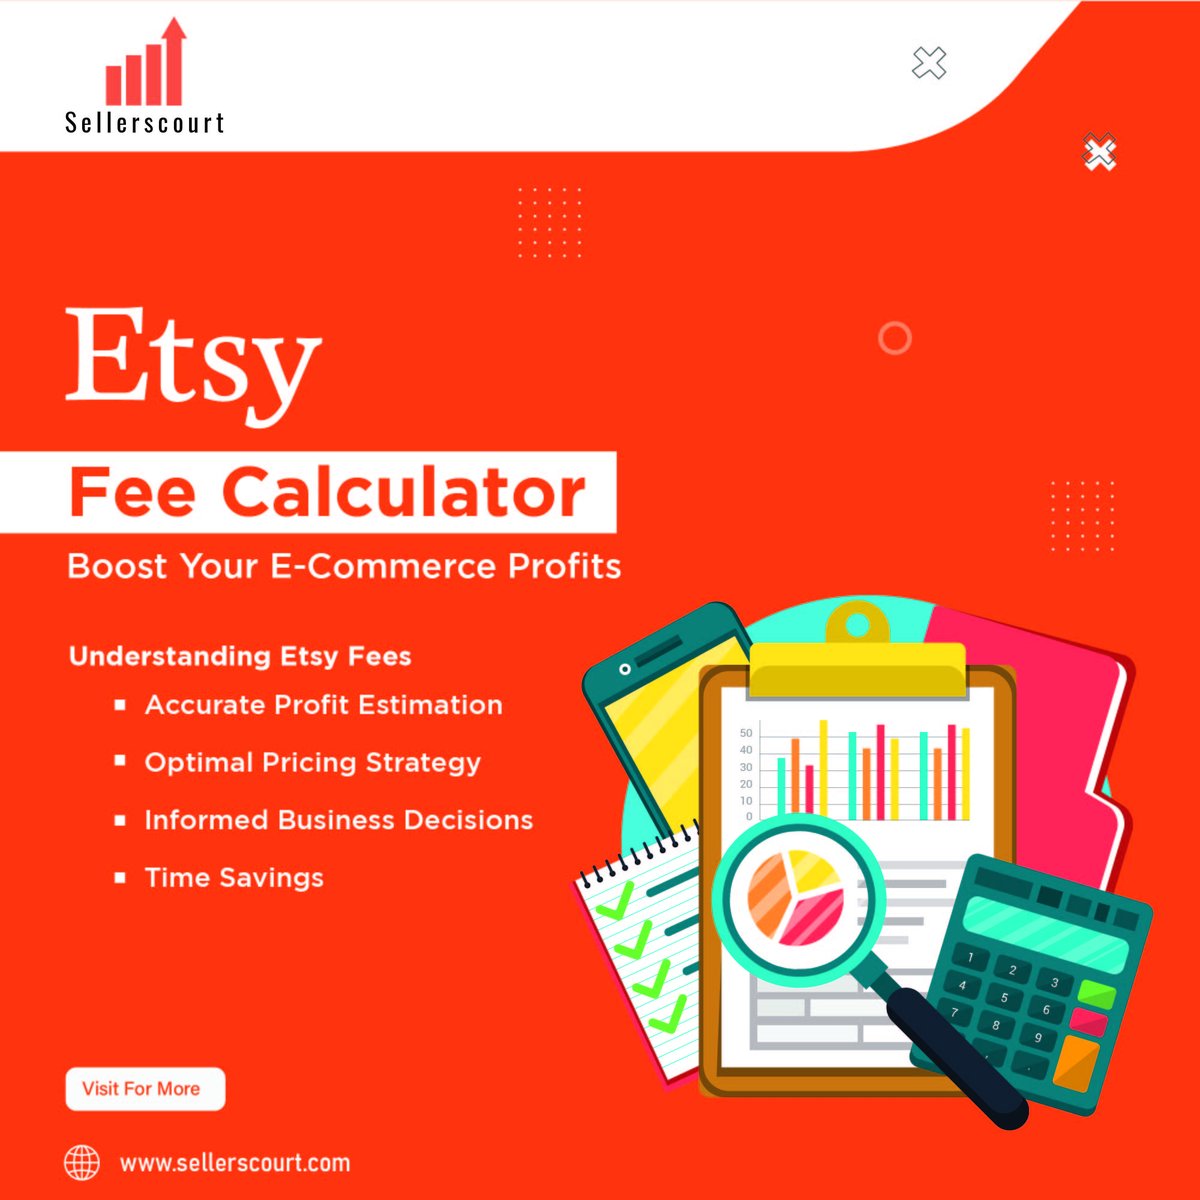 Etsy Fee Calculator 2023 Boost Your E-Commerce Profits with Sellerscourts

#SellersCourt #EtsyFeeCalculator #SellerscourtsGuide #OptimizeProfits #ECommerceSuccess #AccurateFeeCalculations #PricingStrategy #InformedDecisions #TimeSavings #EtsyCalculator #BrandBuildingExperts